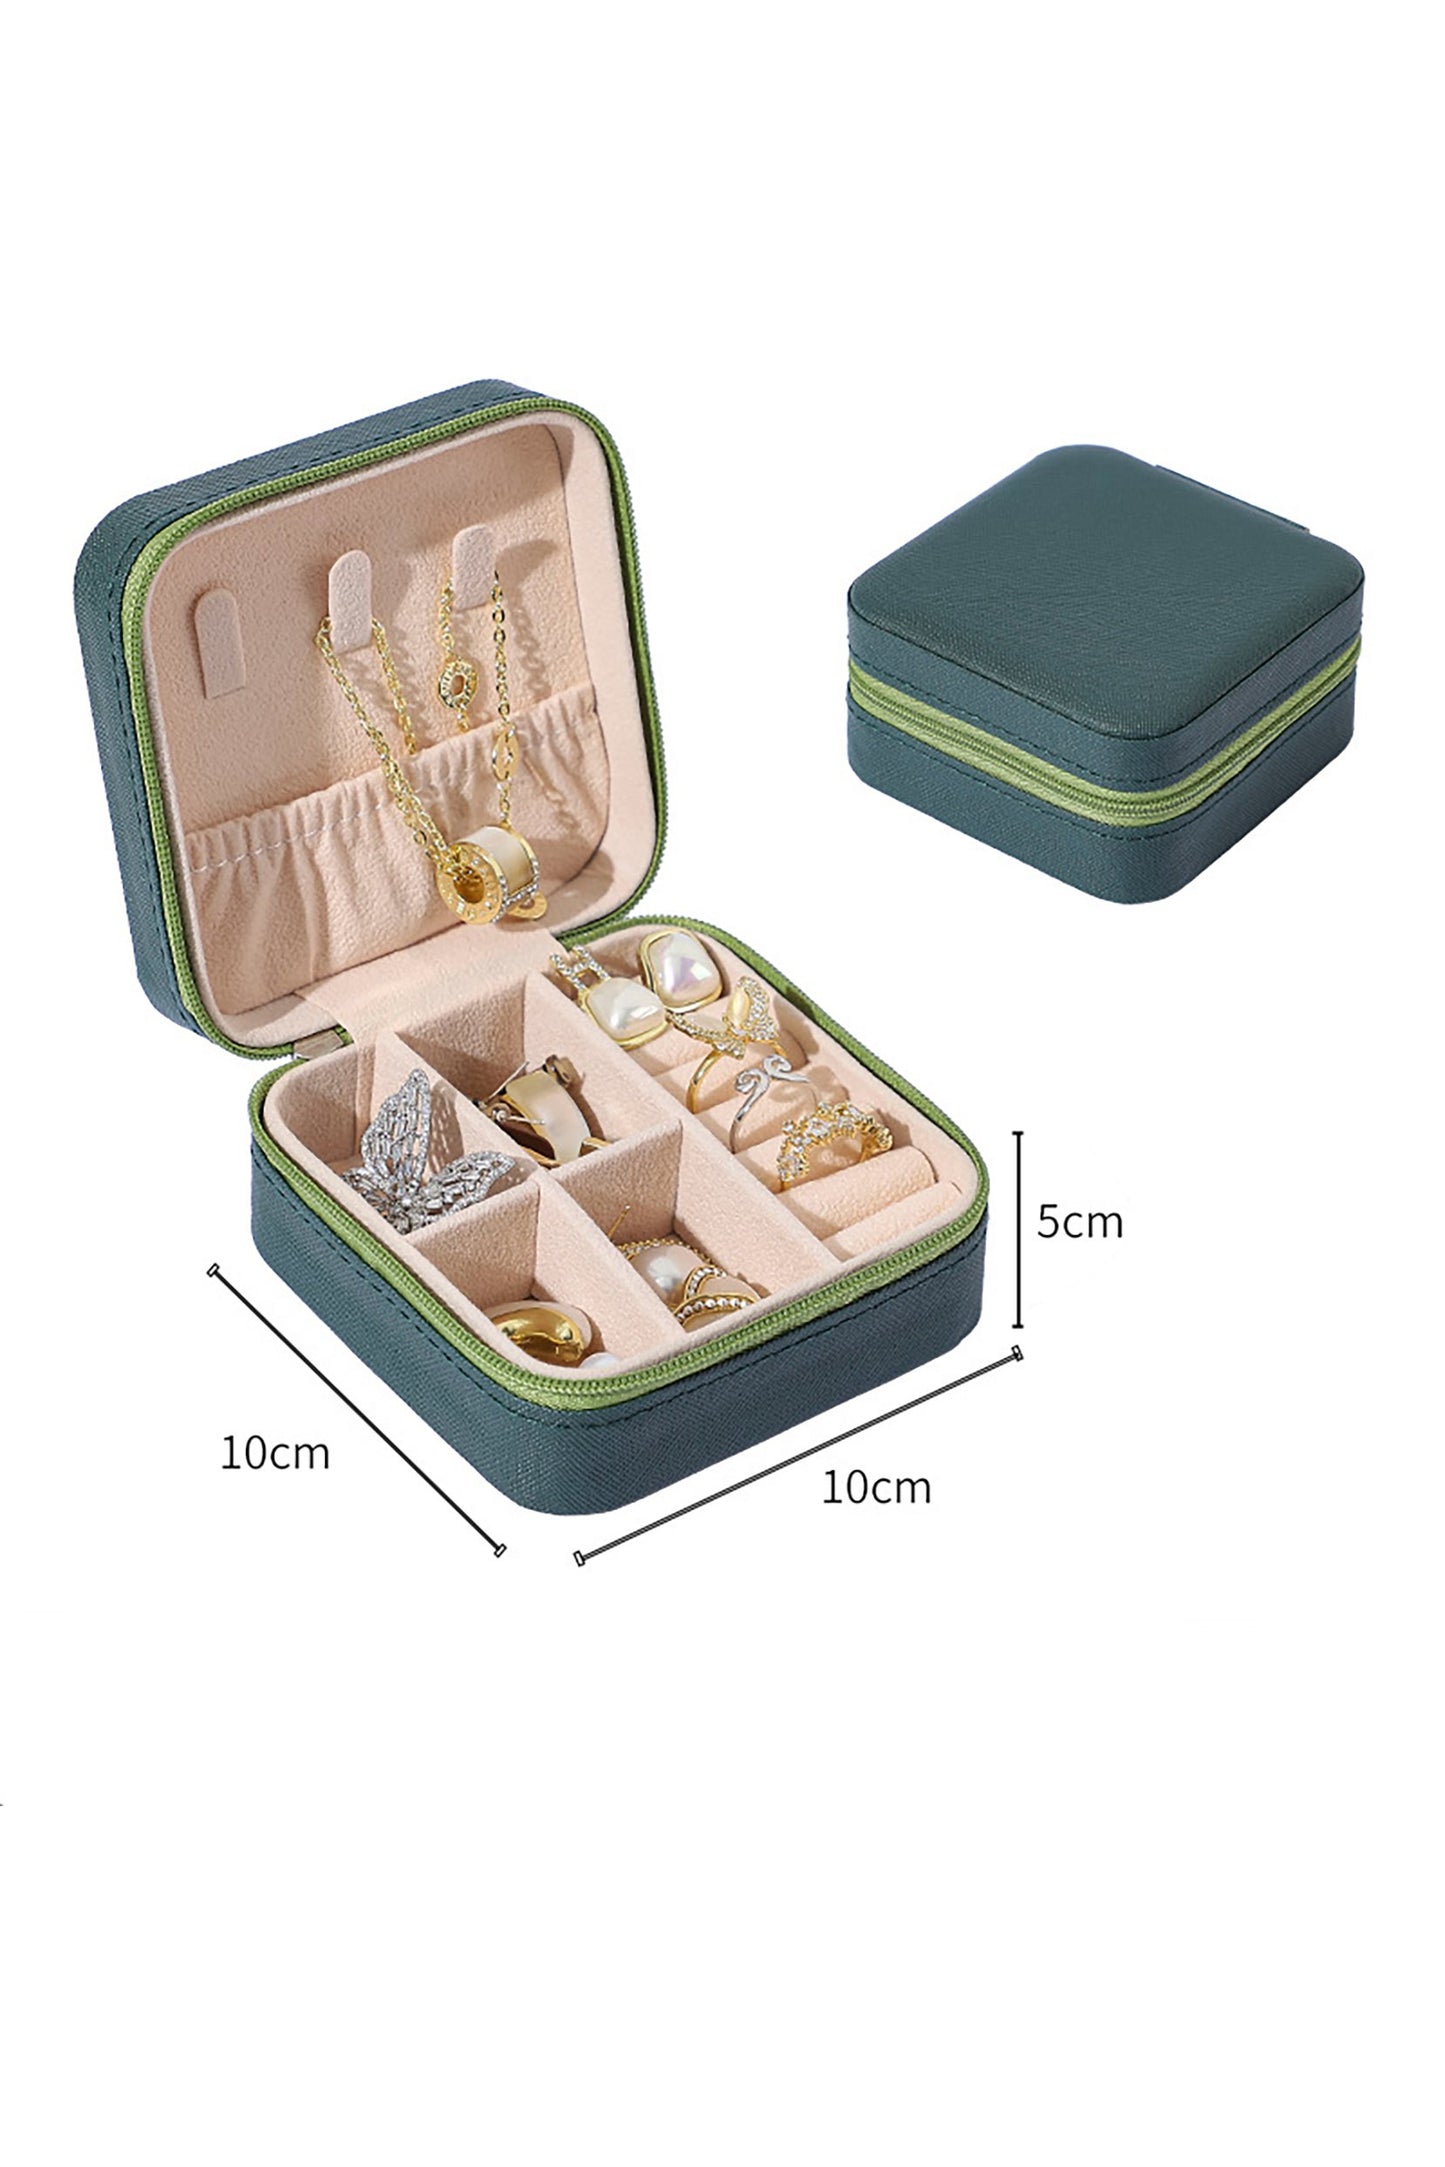 Girls Small Leather Jewelry Boxes for Travel CGF0270 (Set of 1 pcs)